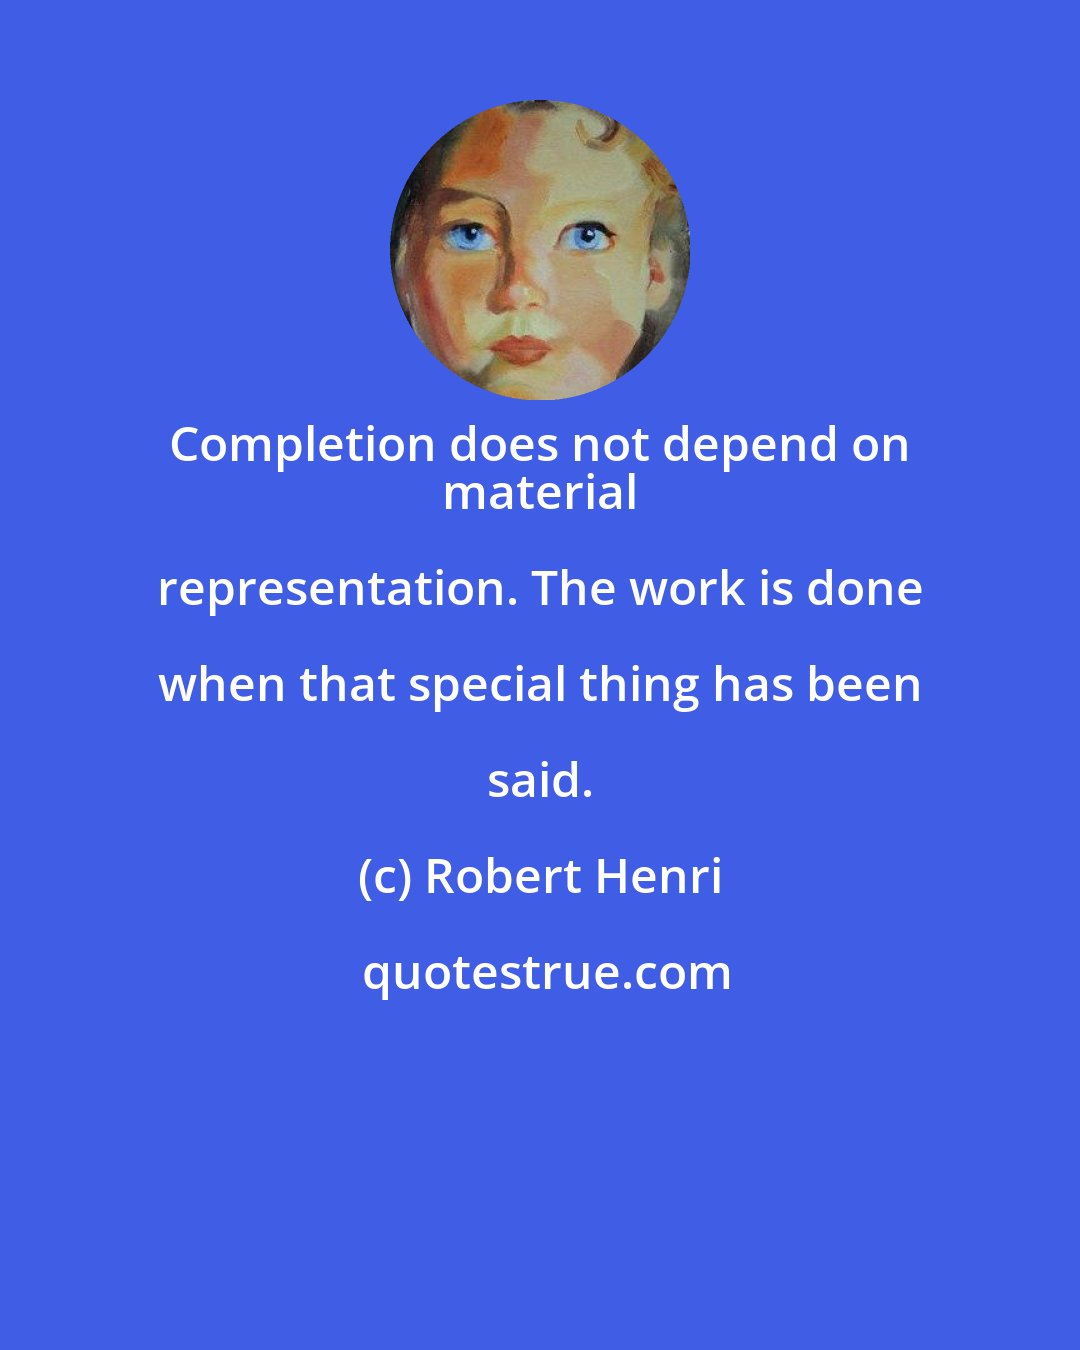 Robert Henri: Completion does not depend on 
 material representation. The work is done when that special thing has been said.